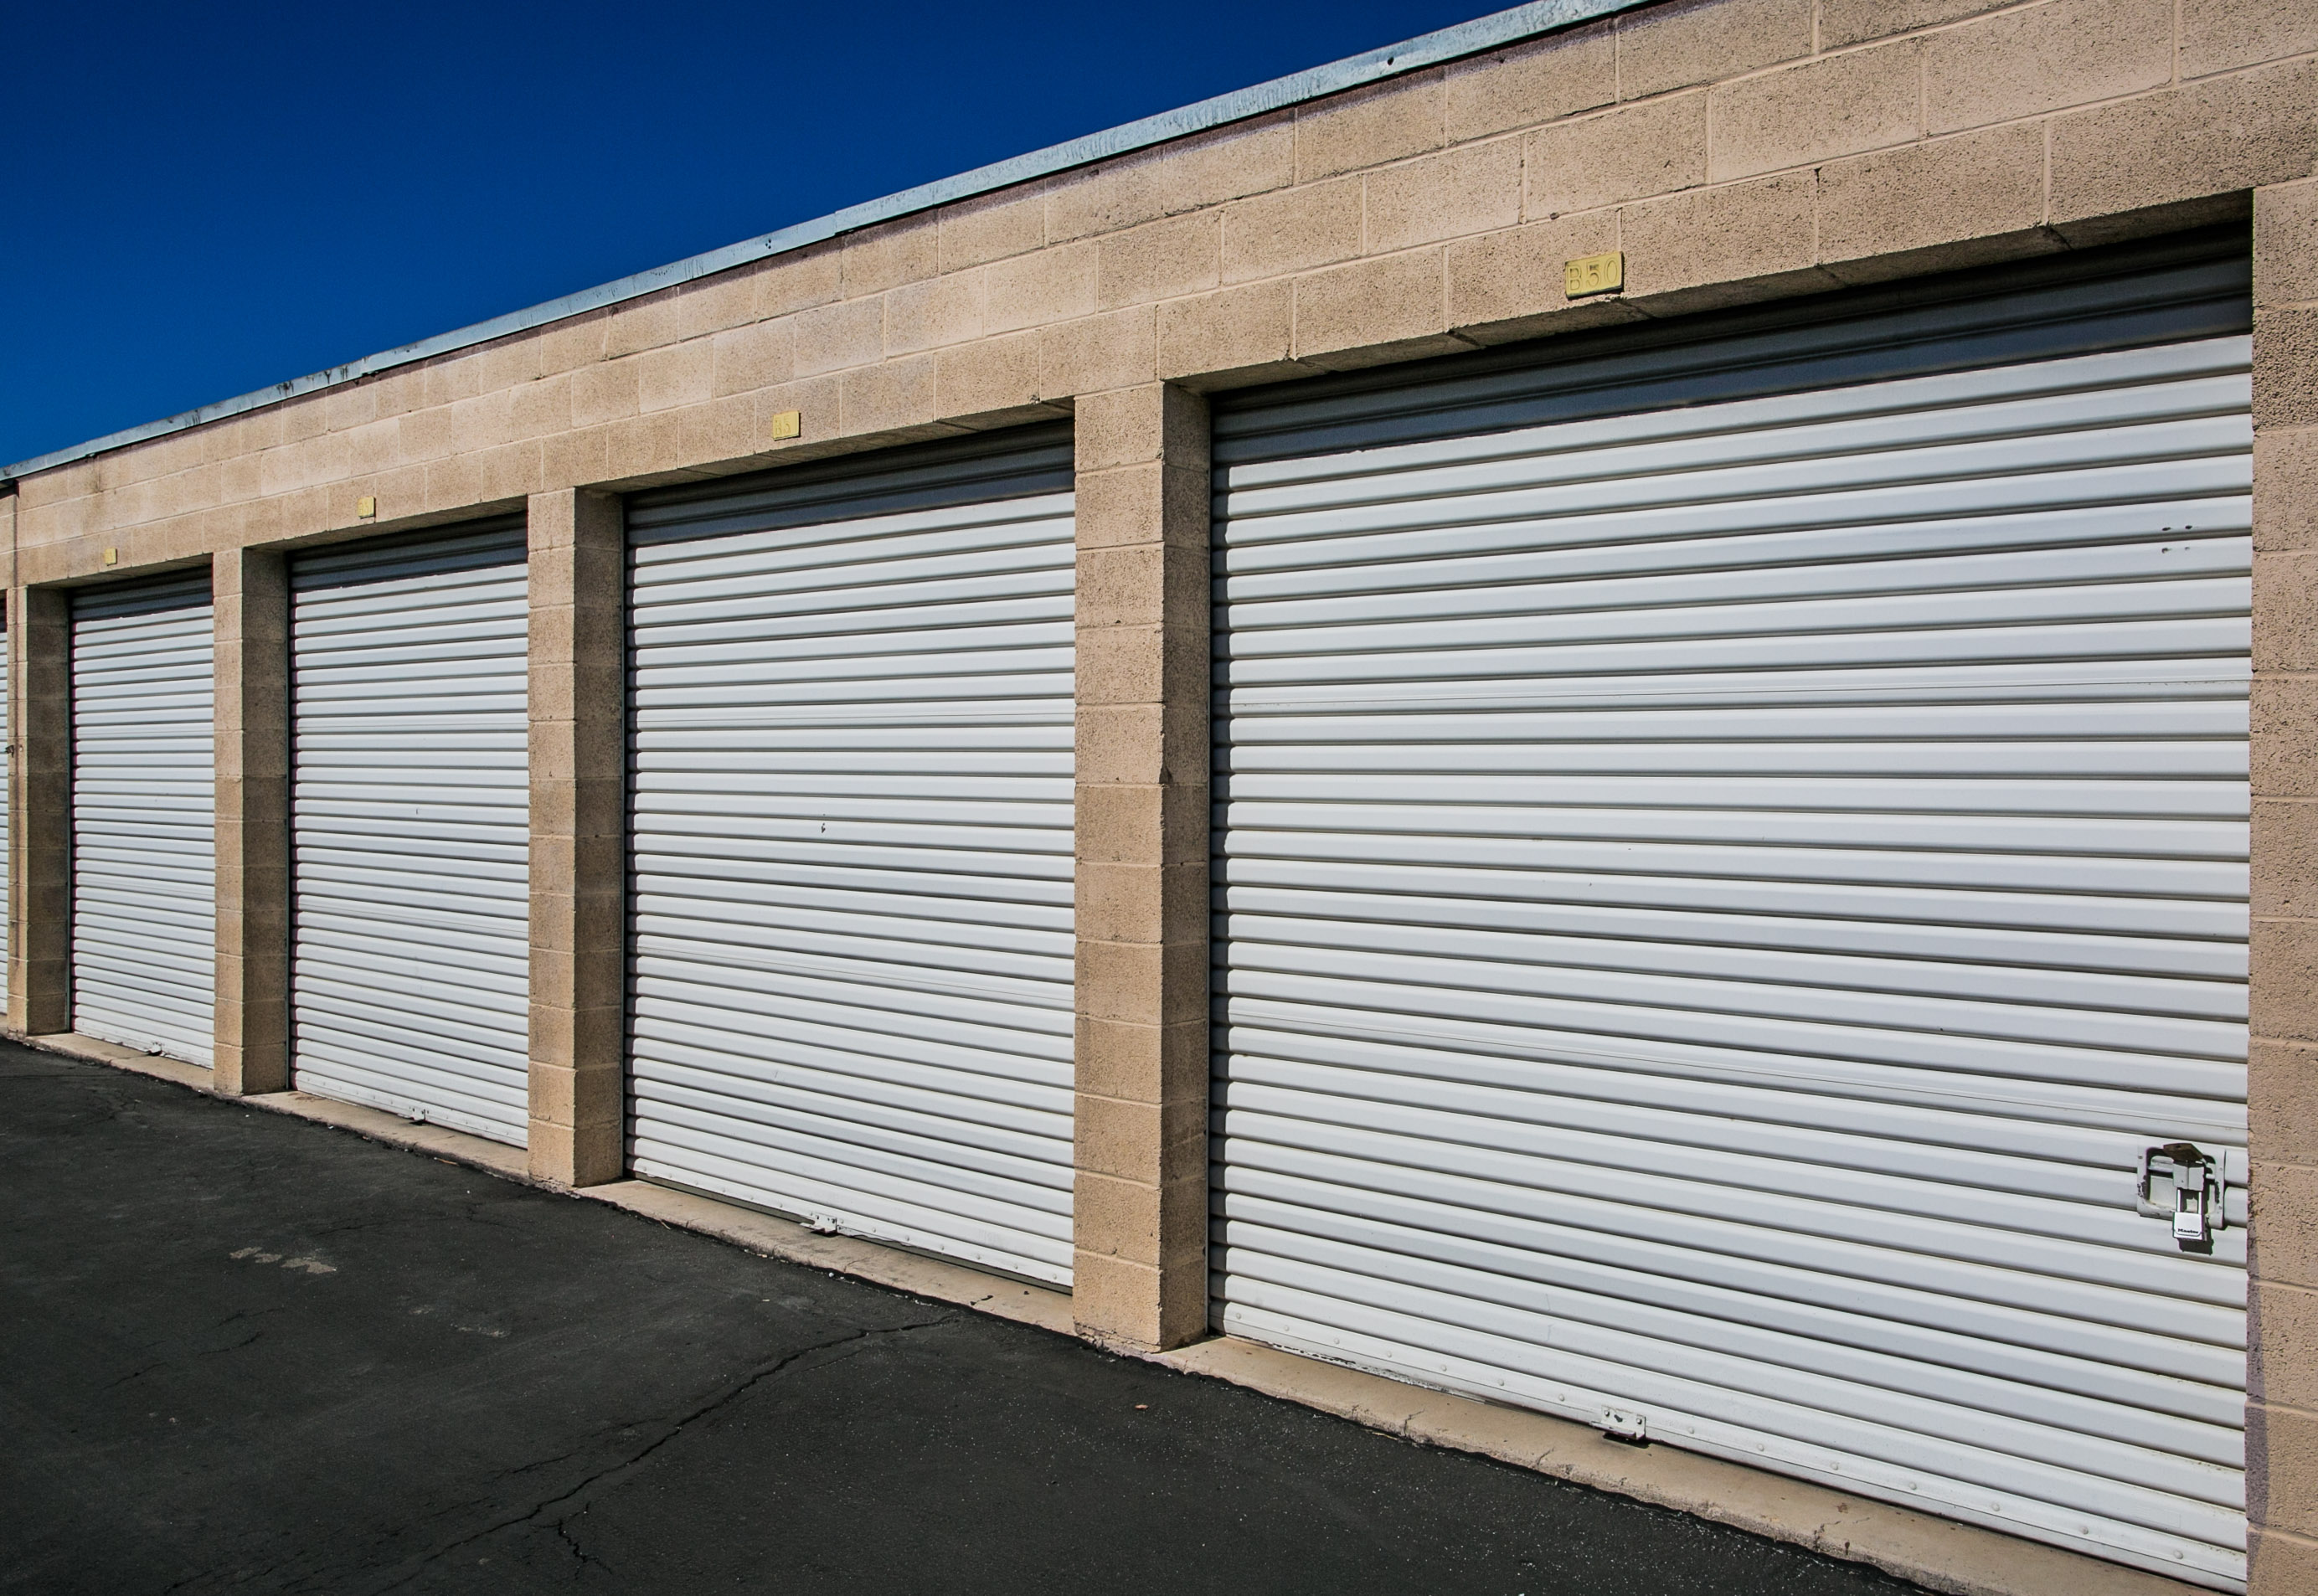 Top quality Las Vegas self storage units and RV parking at competitive rates—IPI Self Storage is the facility for you. Fully fenced with gated access.